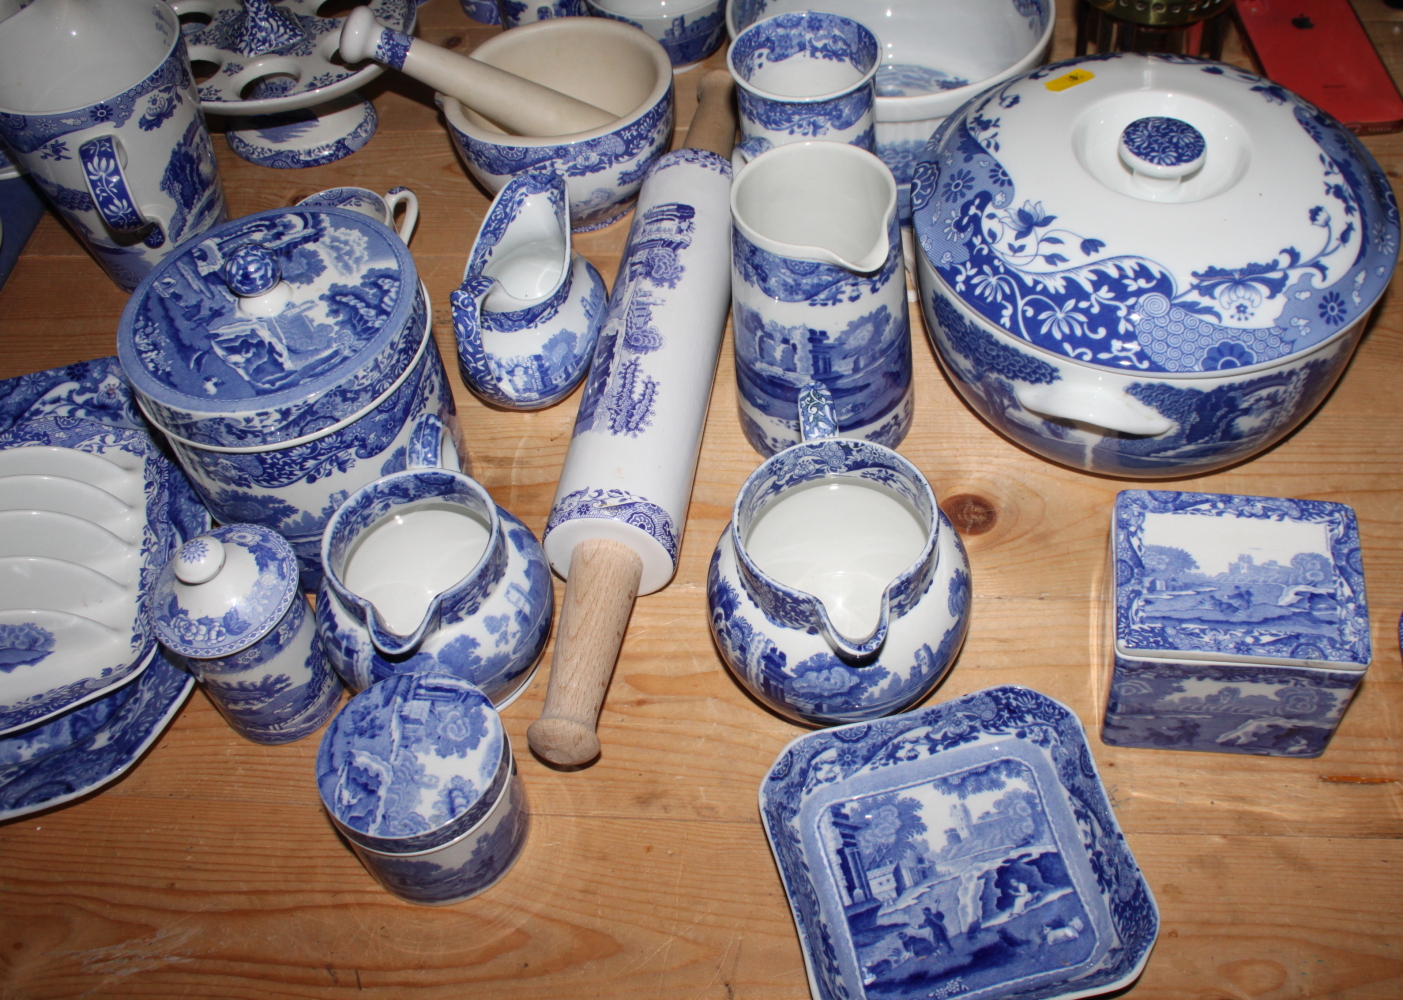 A Copeland Spode "Italian" pattern combination service, including bowls, teapots, teacups, a - Image 7 of 47